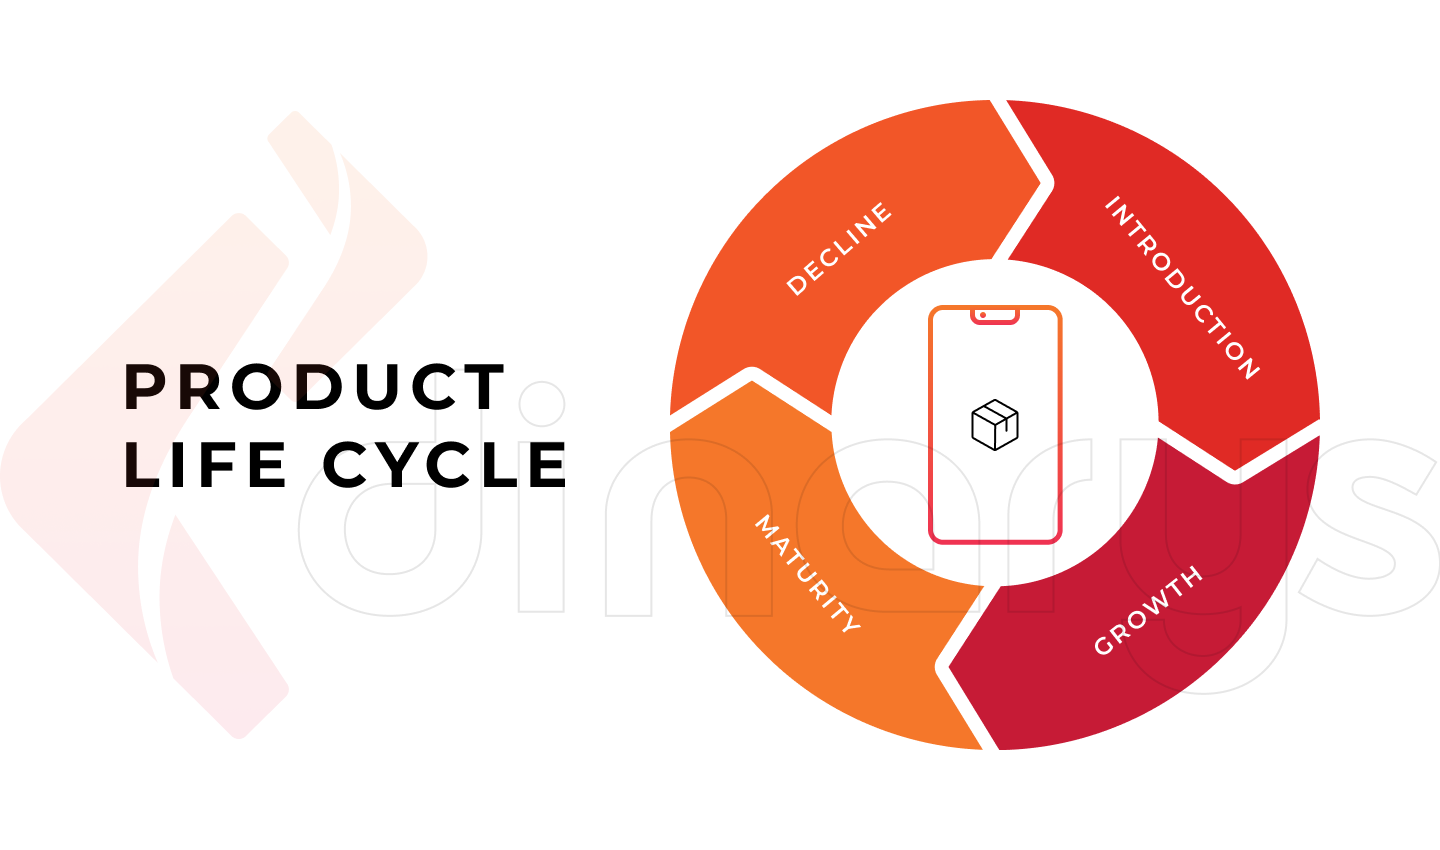 Shorter product life cycle